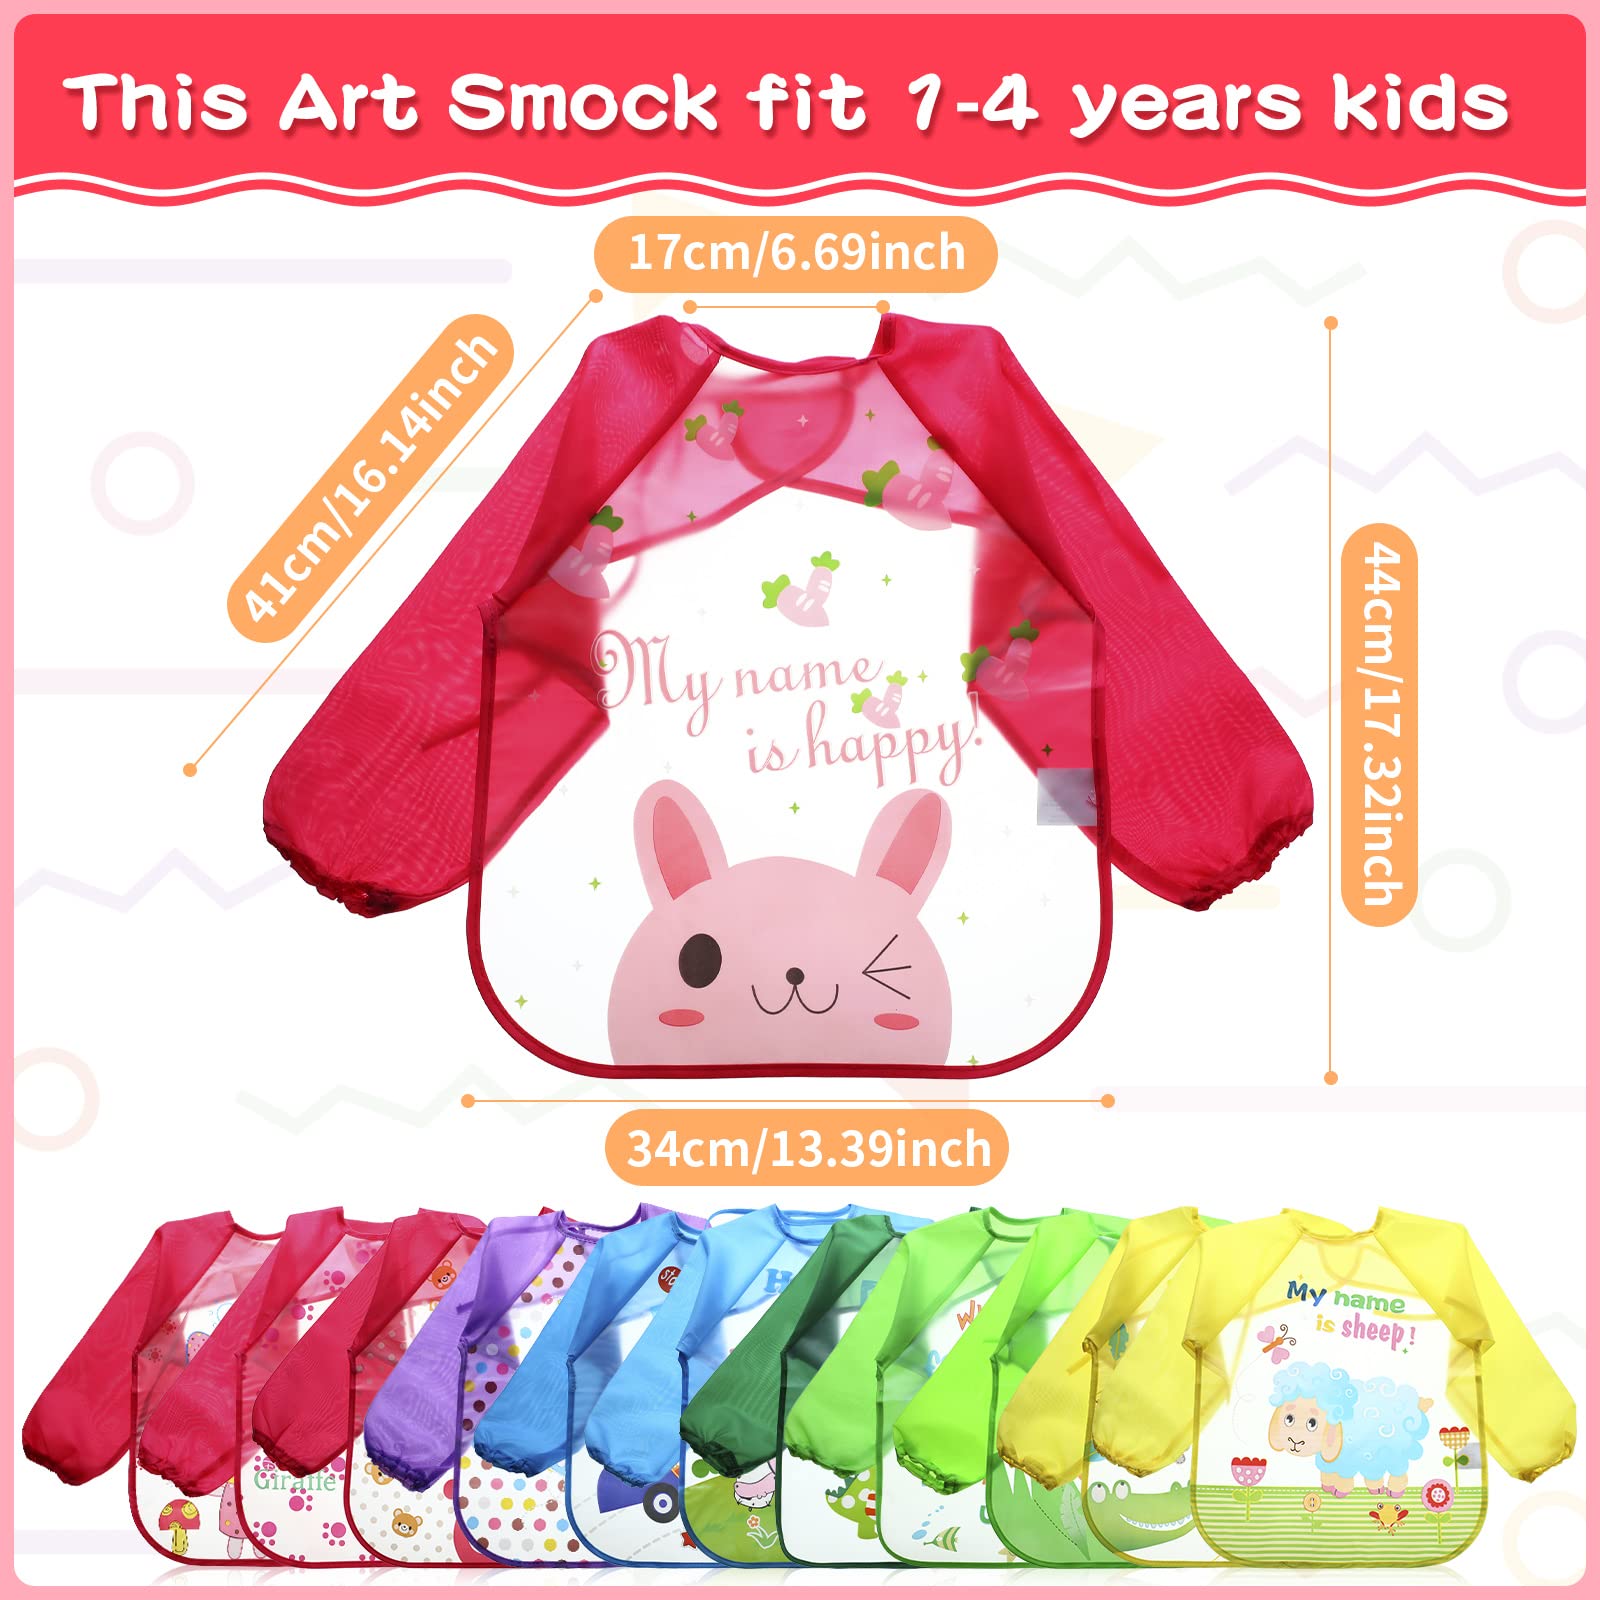 JaGely 12 Pcs Kids Art Smocks Toddler Art Smock Waterproof Kids Painting Aprons Children's Artist Apron with Long Sleeve Washable Bib for Baby Arts and Crafts Supplies Coloring Eating Aged 1-4 Years